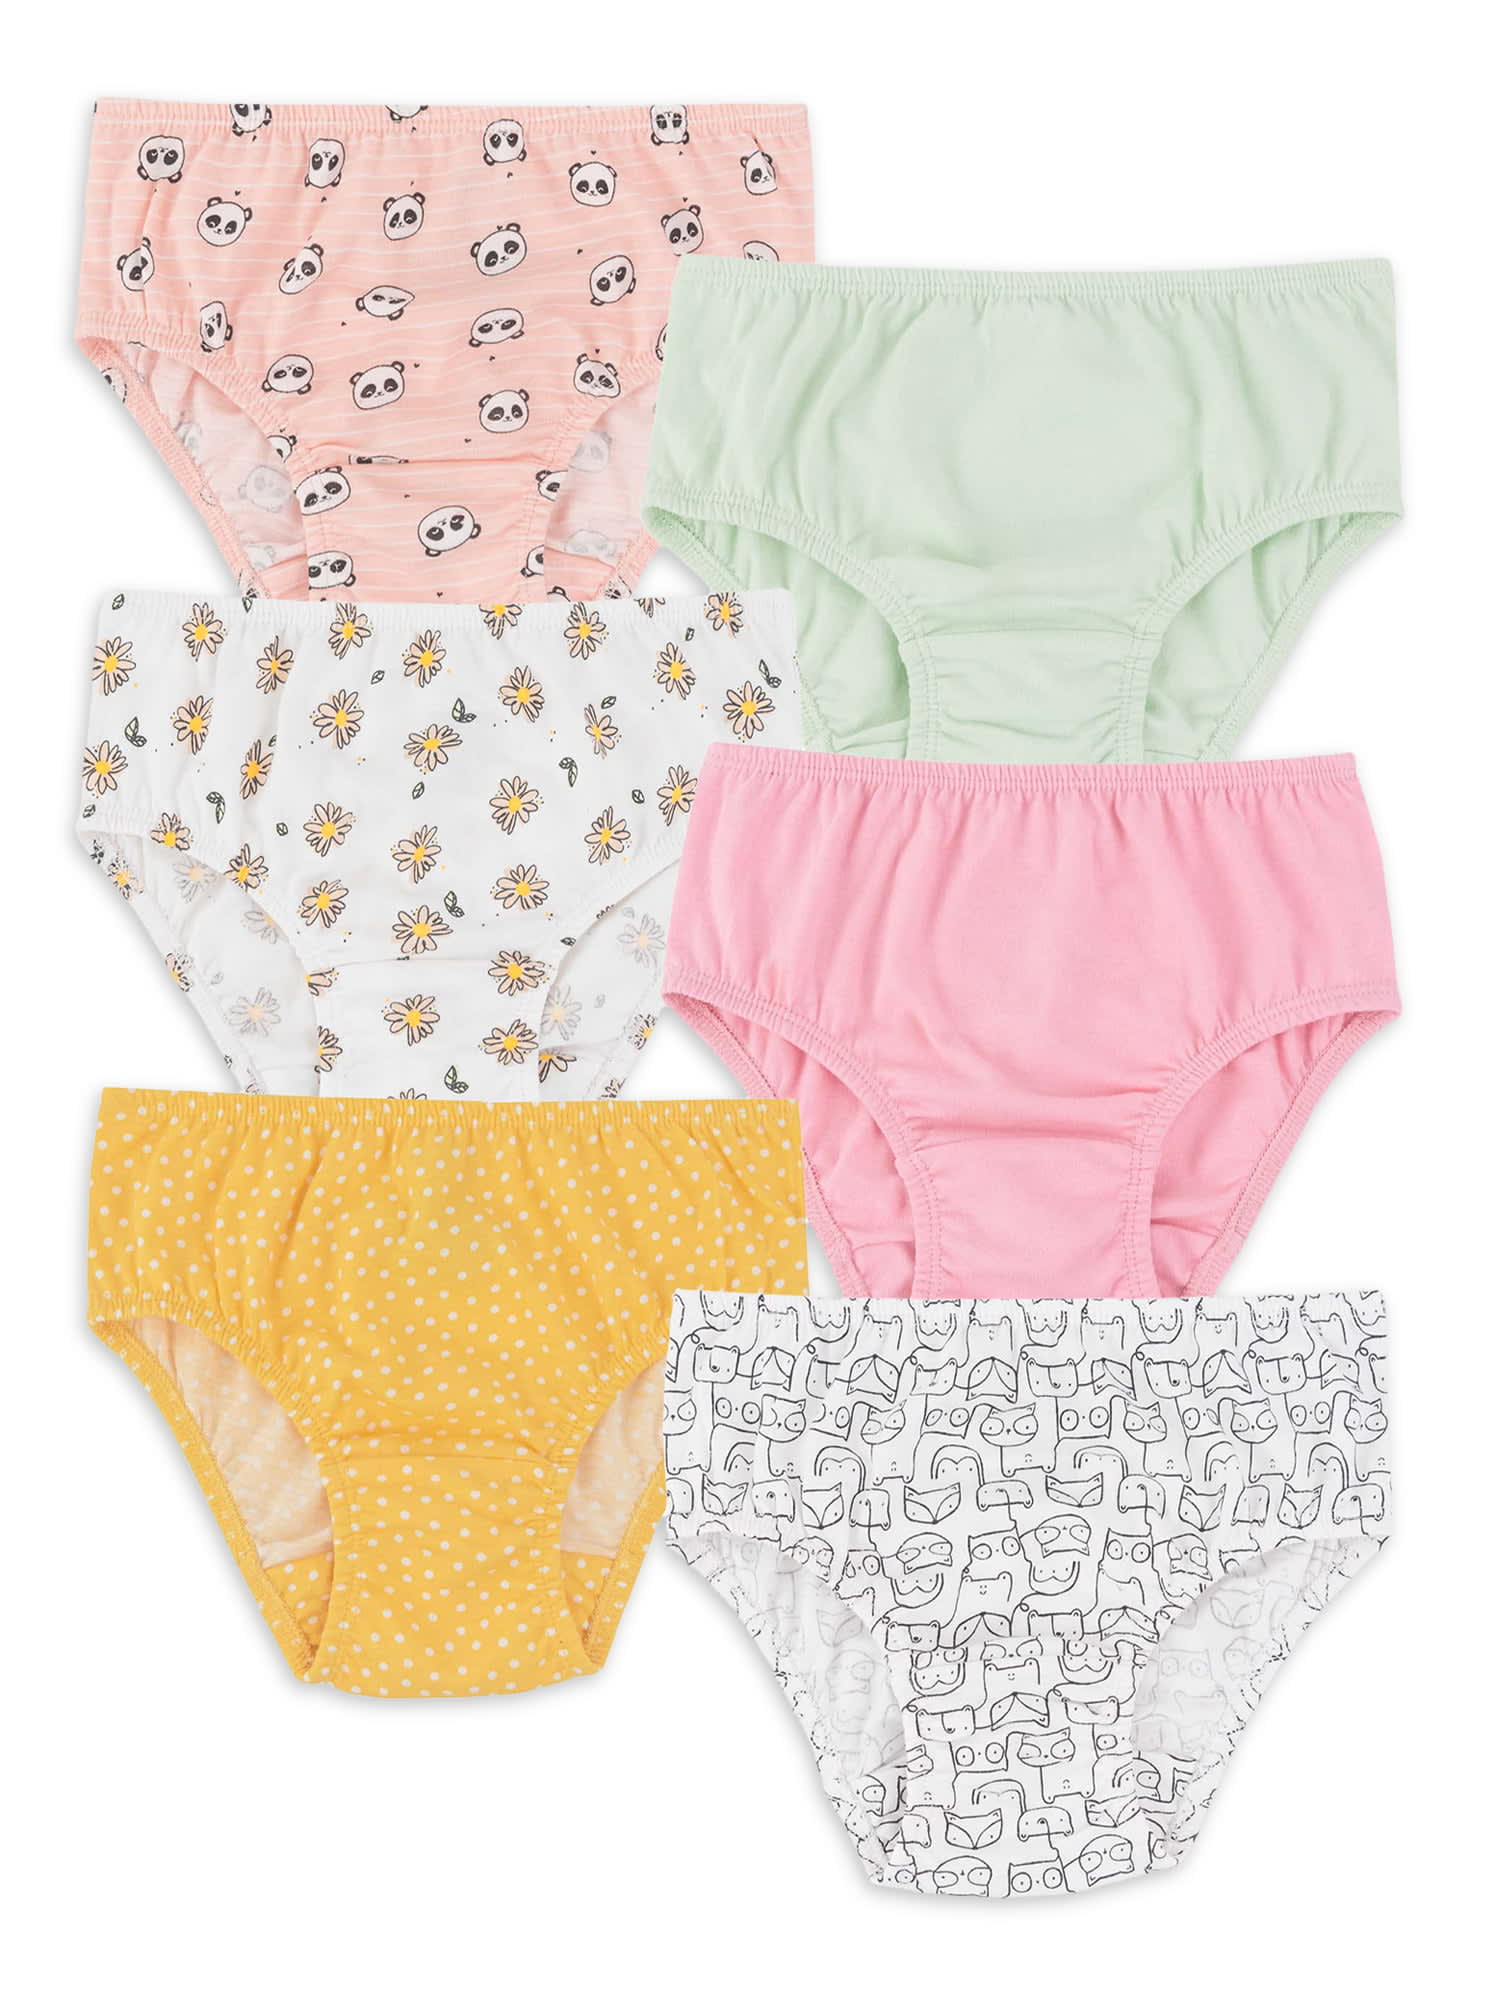  Fruit Of The Loom Toddler Girls Tag-Free Cotton Underwear